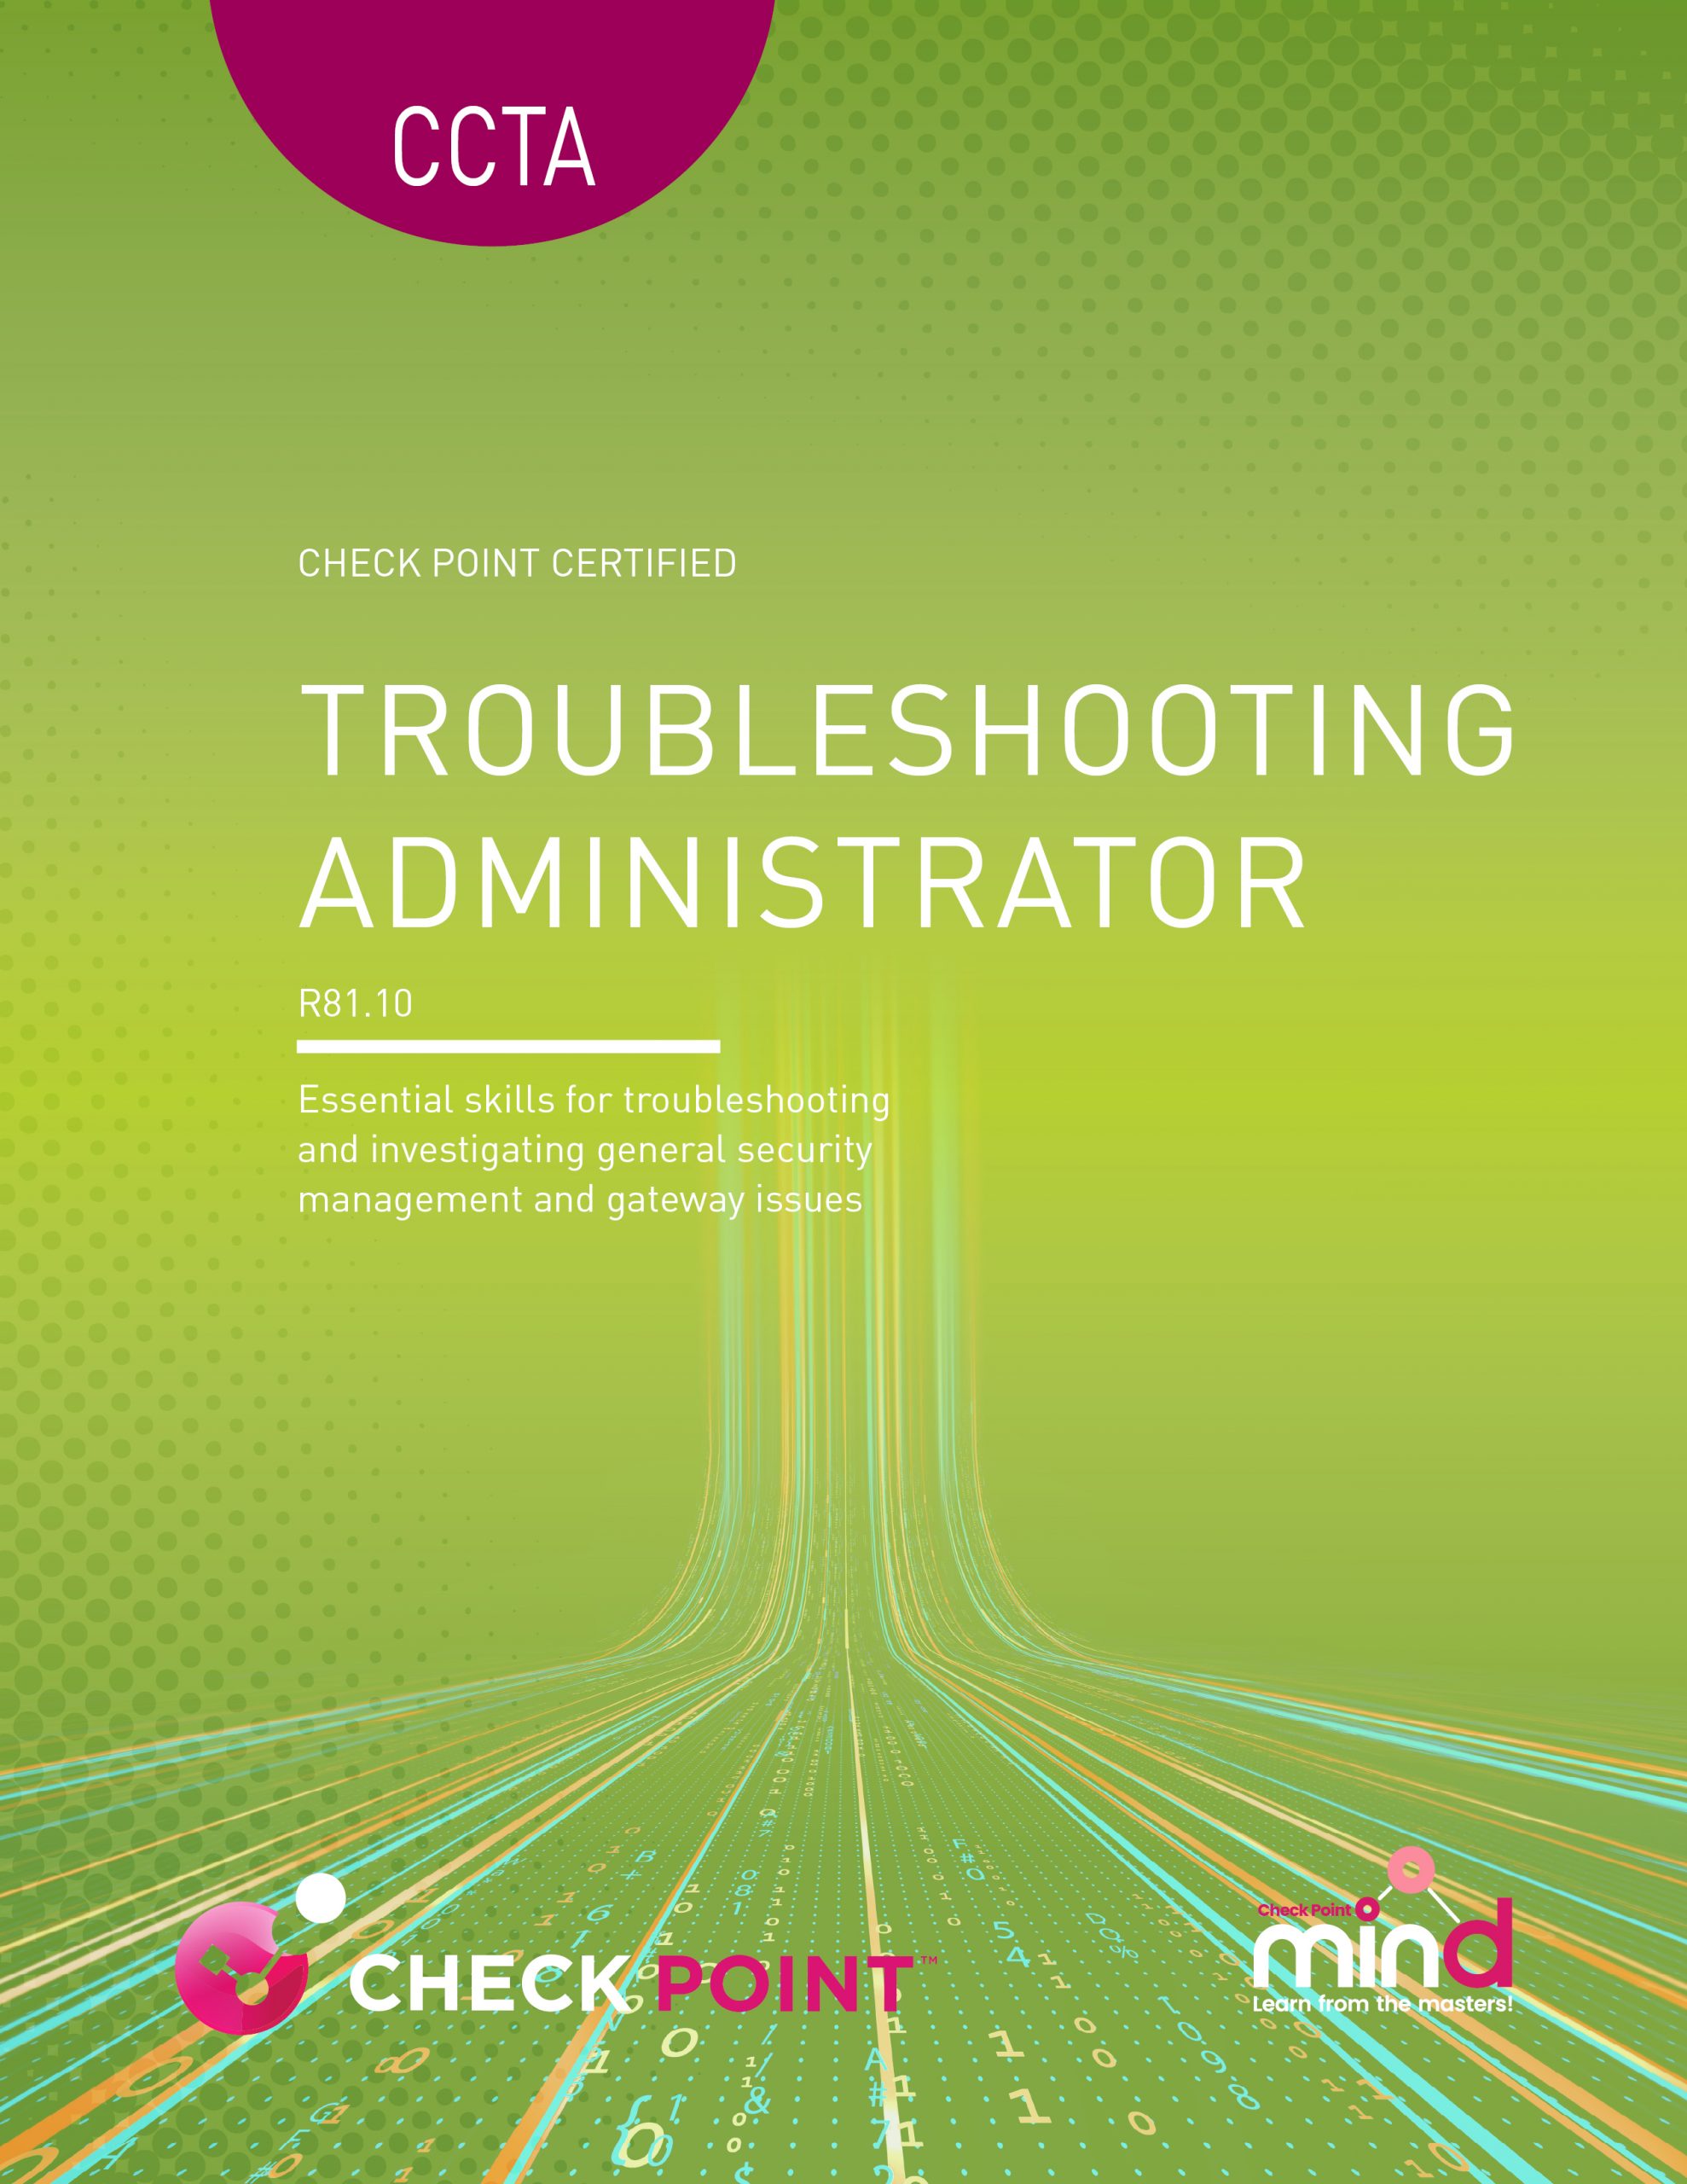 CCTA-R81.20 – Check Point Certified Troubleshooting Administrator on R81.20 (CCTA)